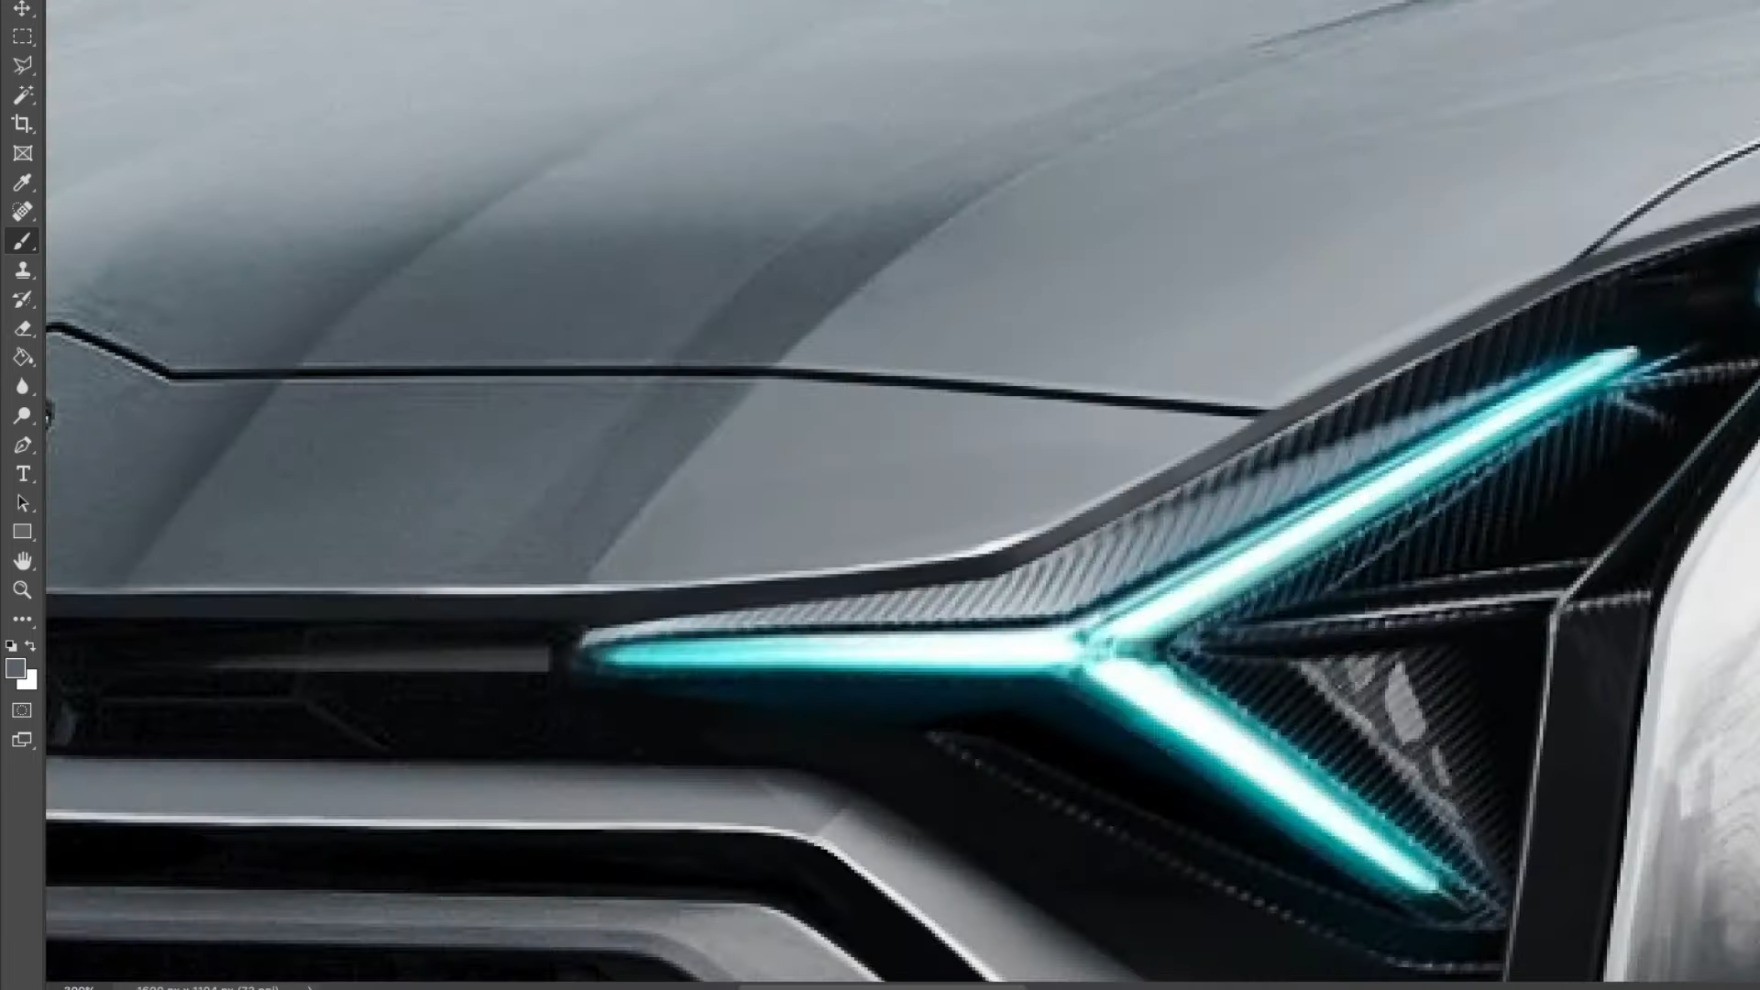 YouTube Artist Gives Urus a Radical Facelift With Lights From Exotic ...